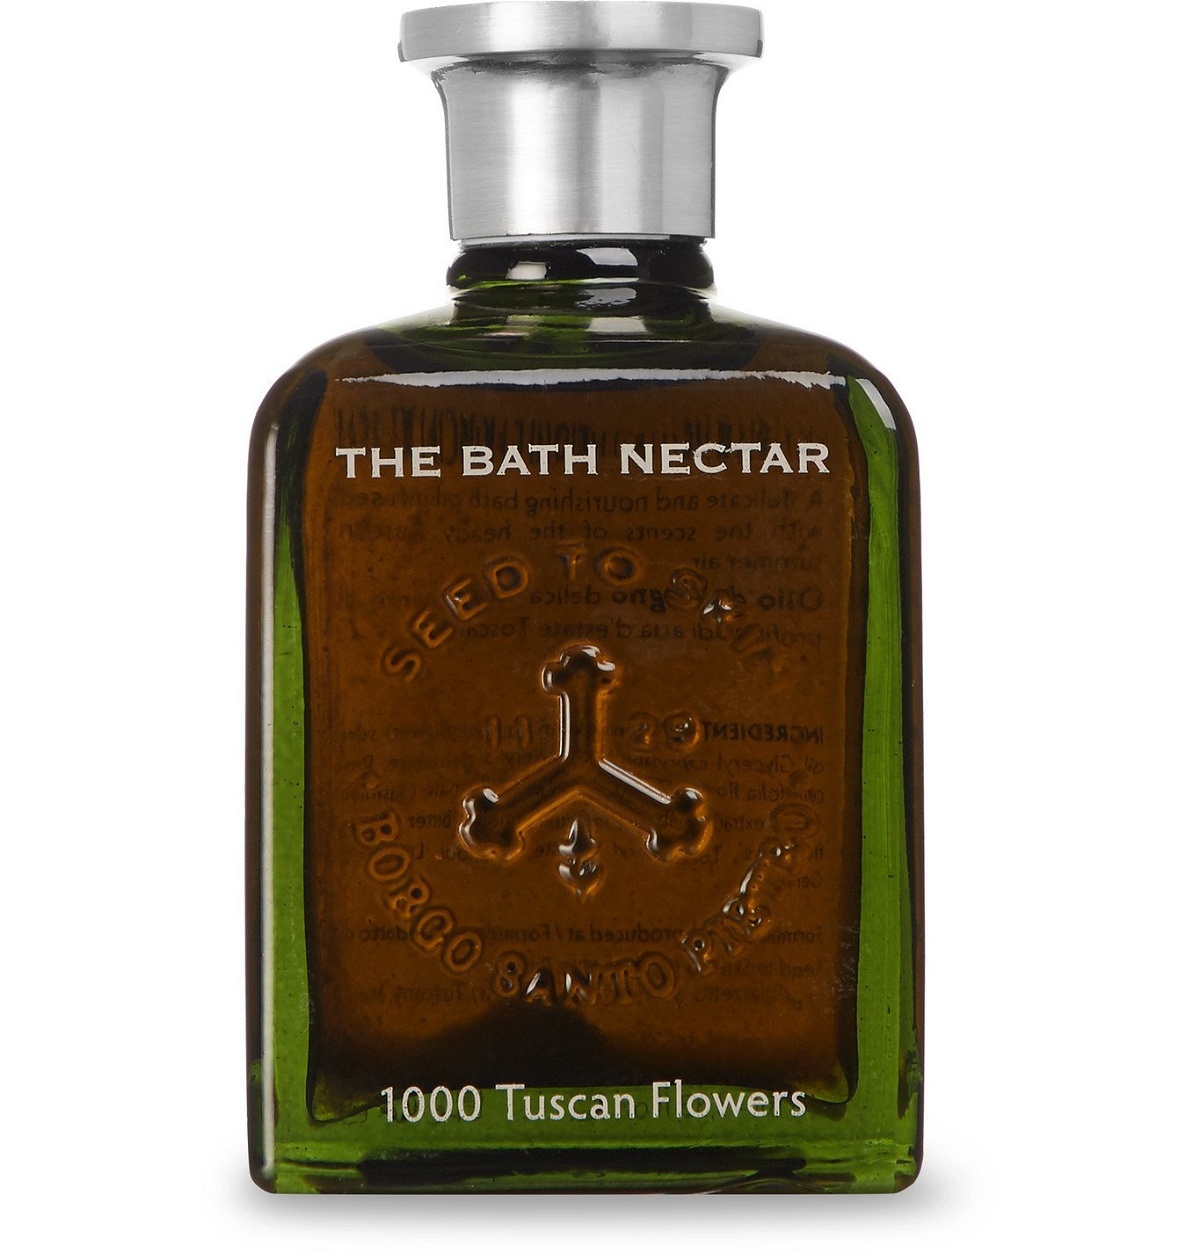 Photo: Seed to Skin - The Bath Nectar - 1000 Tuscan Flowers, 100ml - Colorless